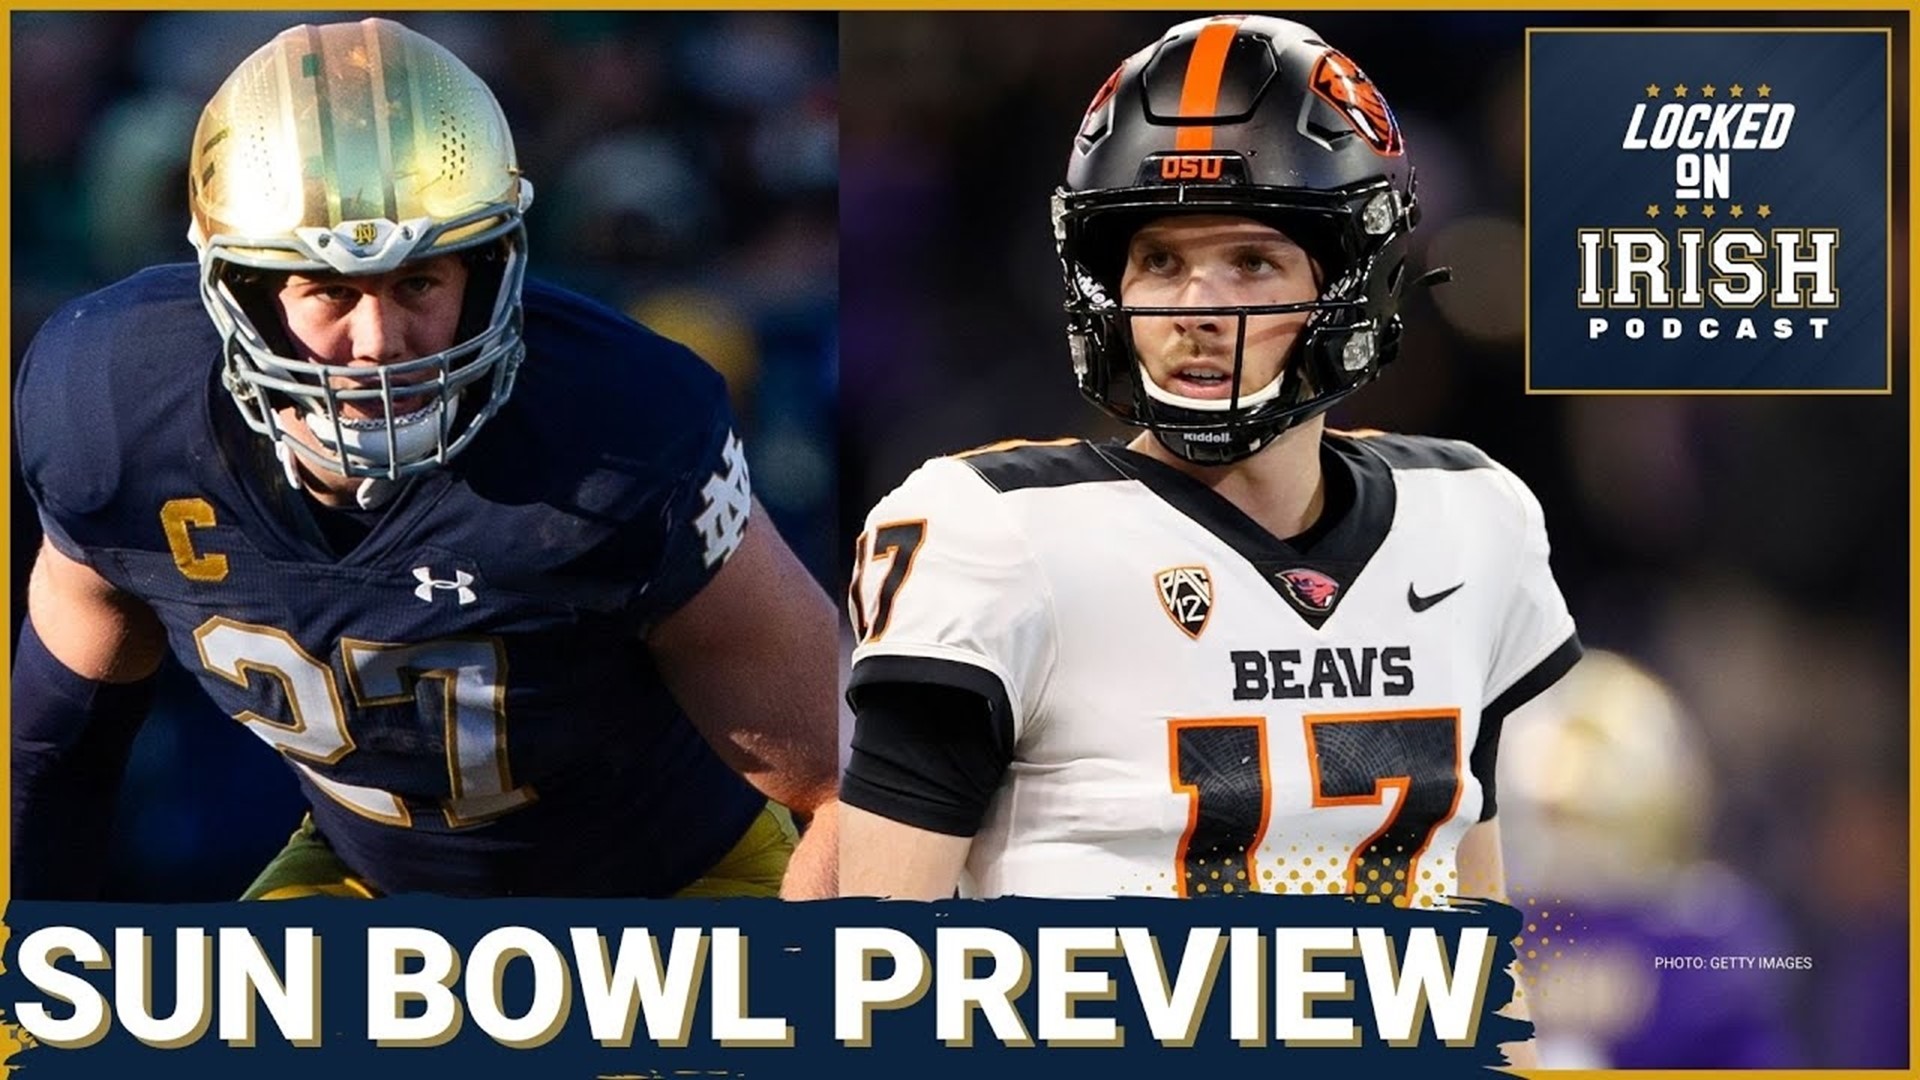 The Notre Dame Fighting Irish are set to square off against the Oregon State Beavers in the Sun Bowl to close out their 2023 college football season.